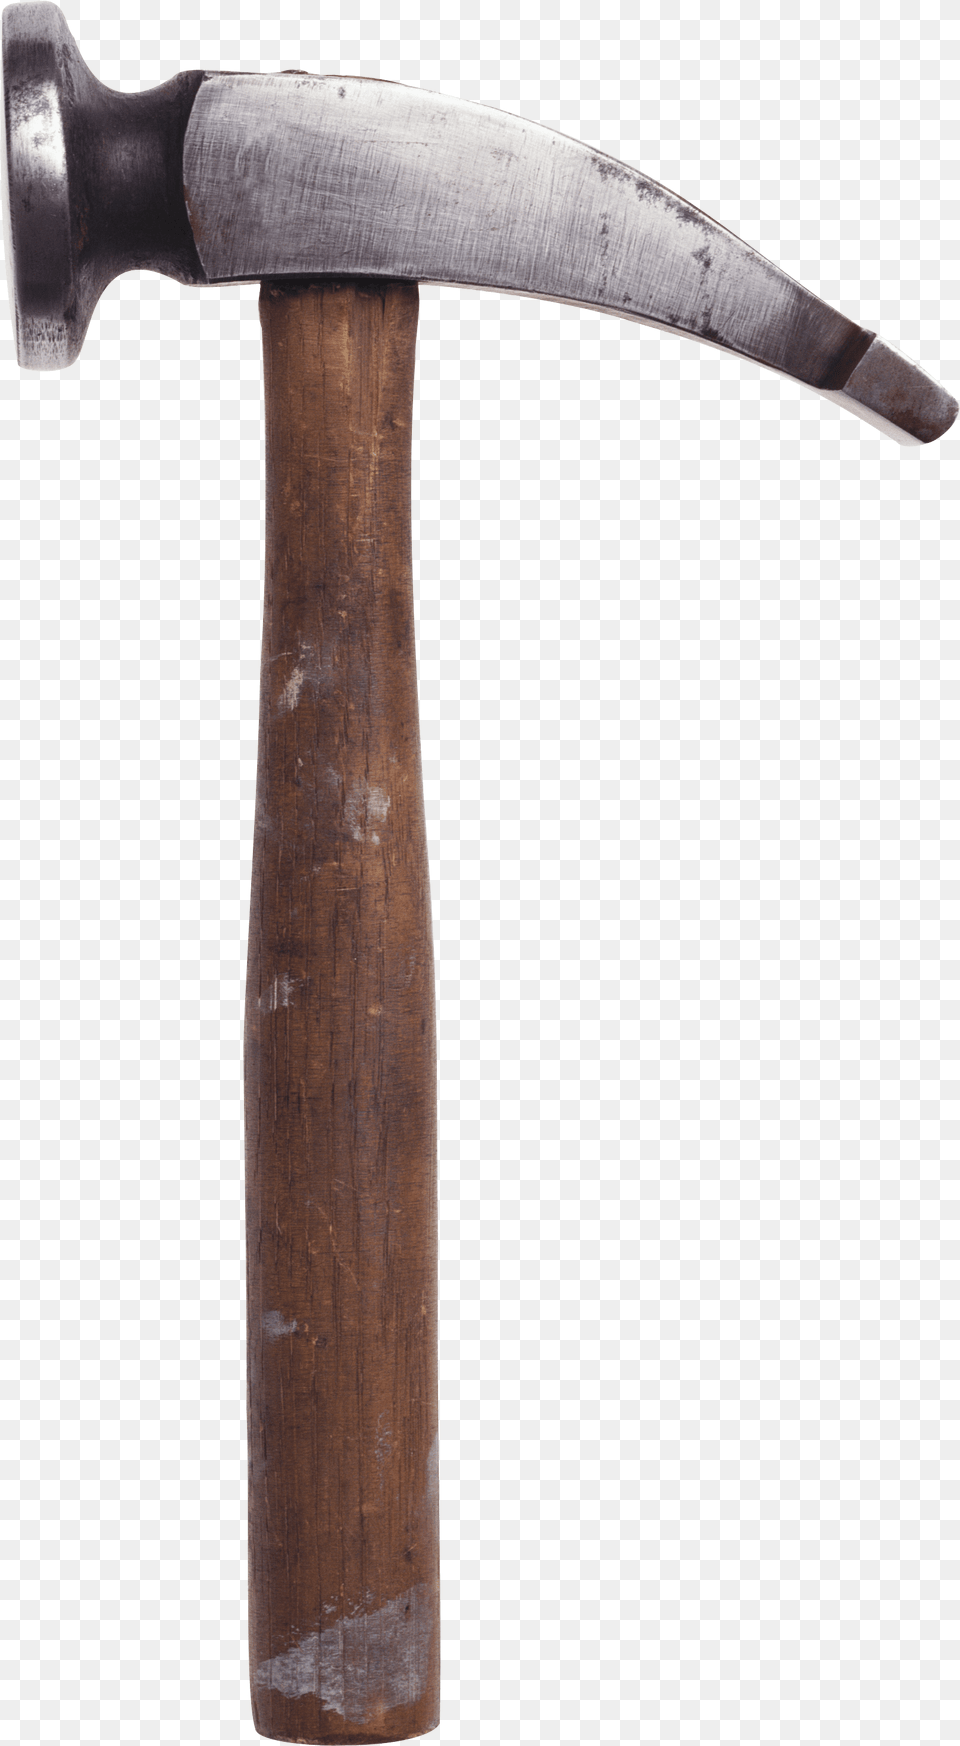 Vintage Hammer Transparent Vintage Hammers, Device, Axe, Tool, Weapon Png Image